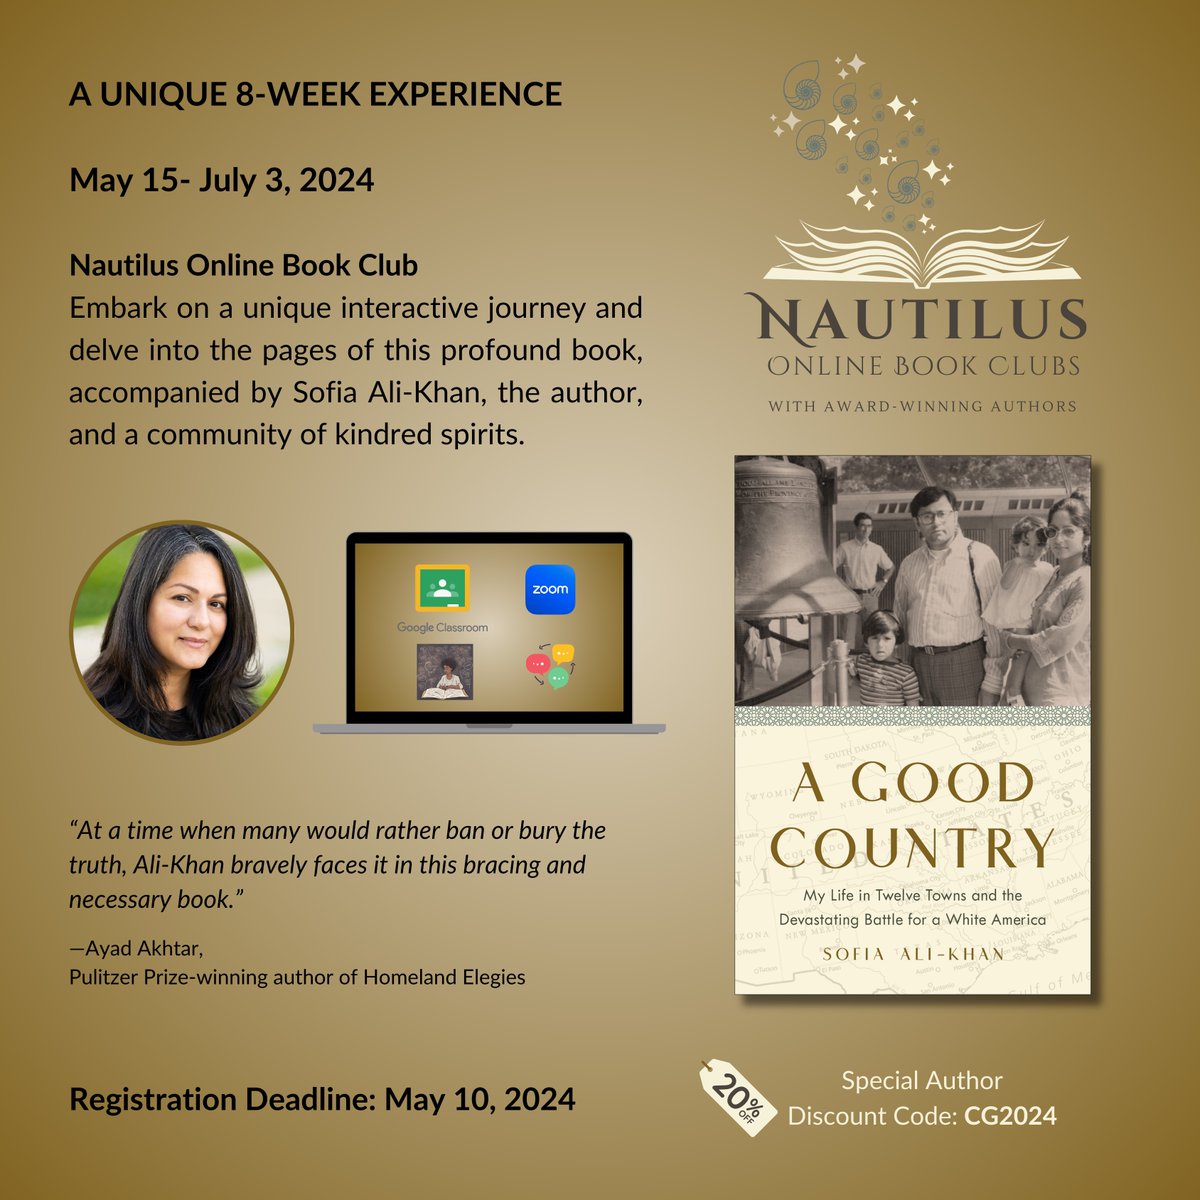 Four days left!
All of my fees from the book club will go to HEAL Palestine, an organization which provides urgent humanitarian aid, including medical treatment, shelter, clothing to the children of Gaza.

Register here using COUPON CODE CG2024: nautilusbookawards.com/goodcountry